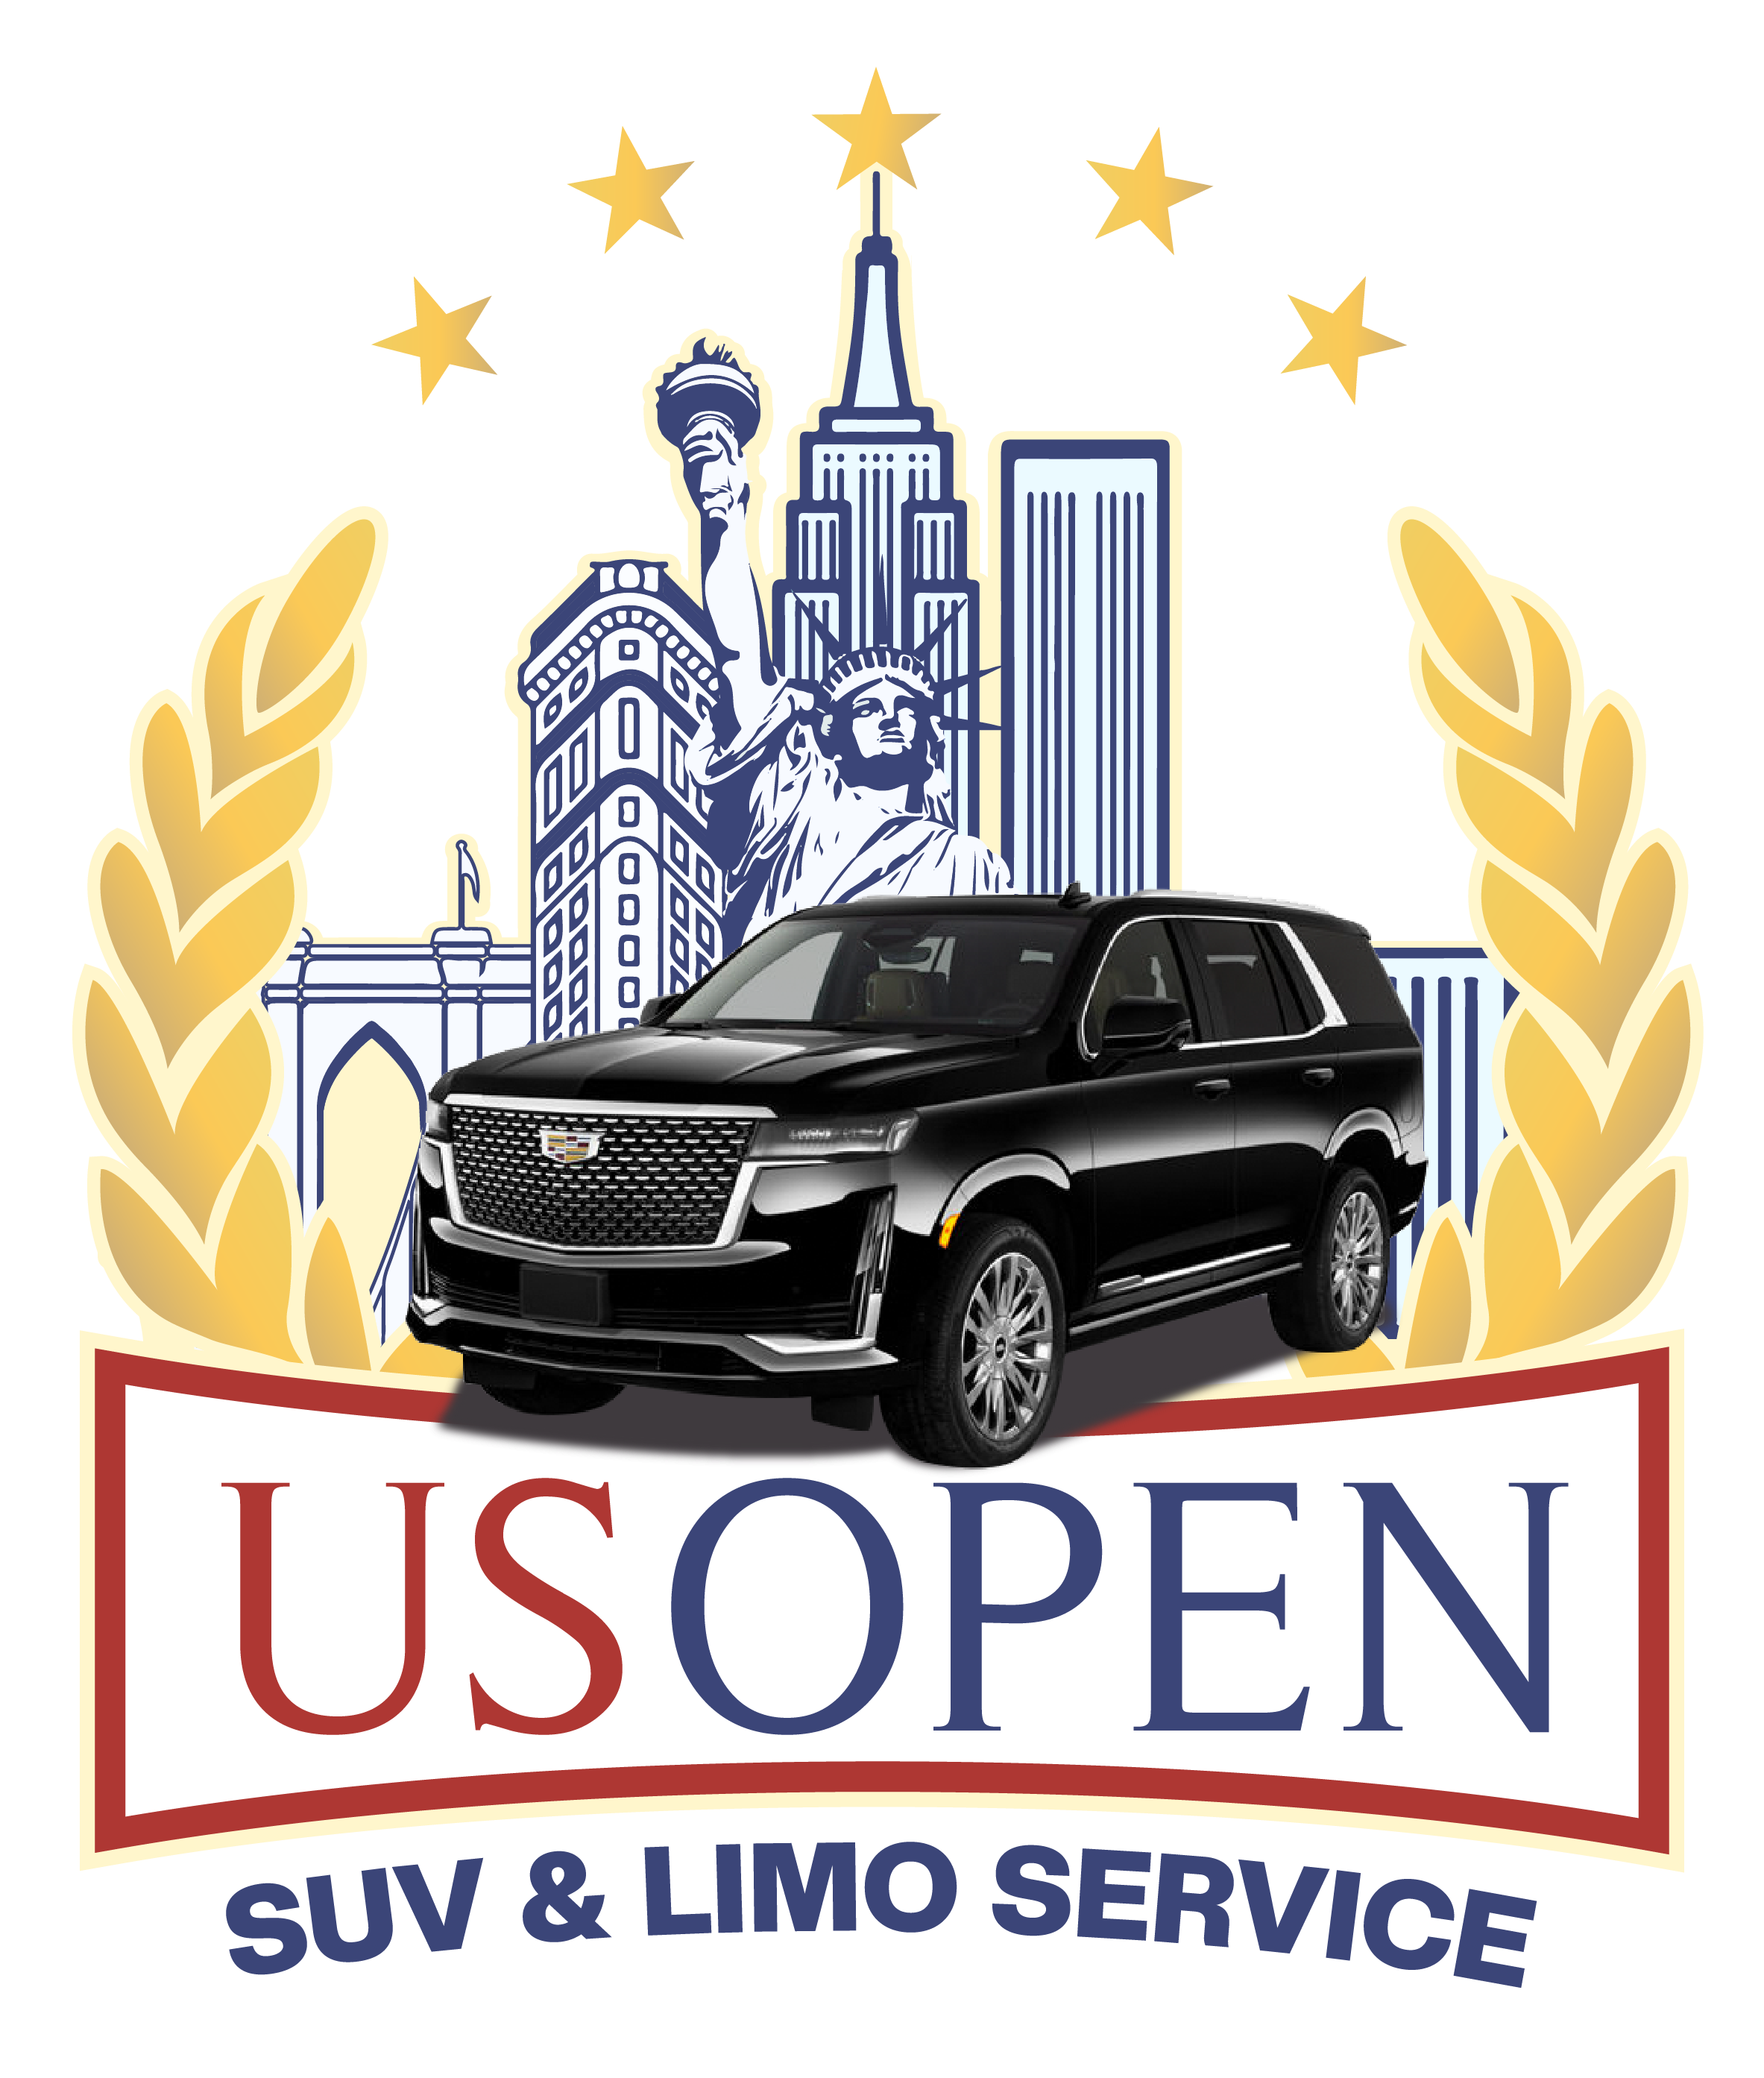 About us US OPEN SUV & LIMO SERVICE